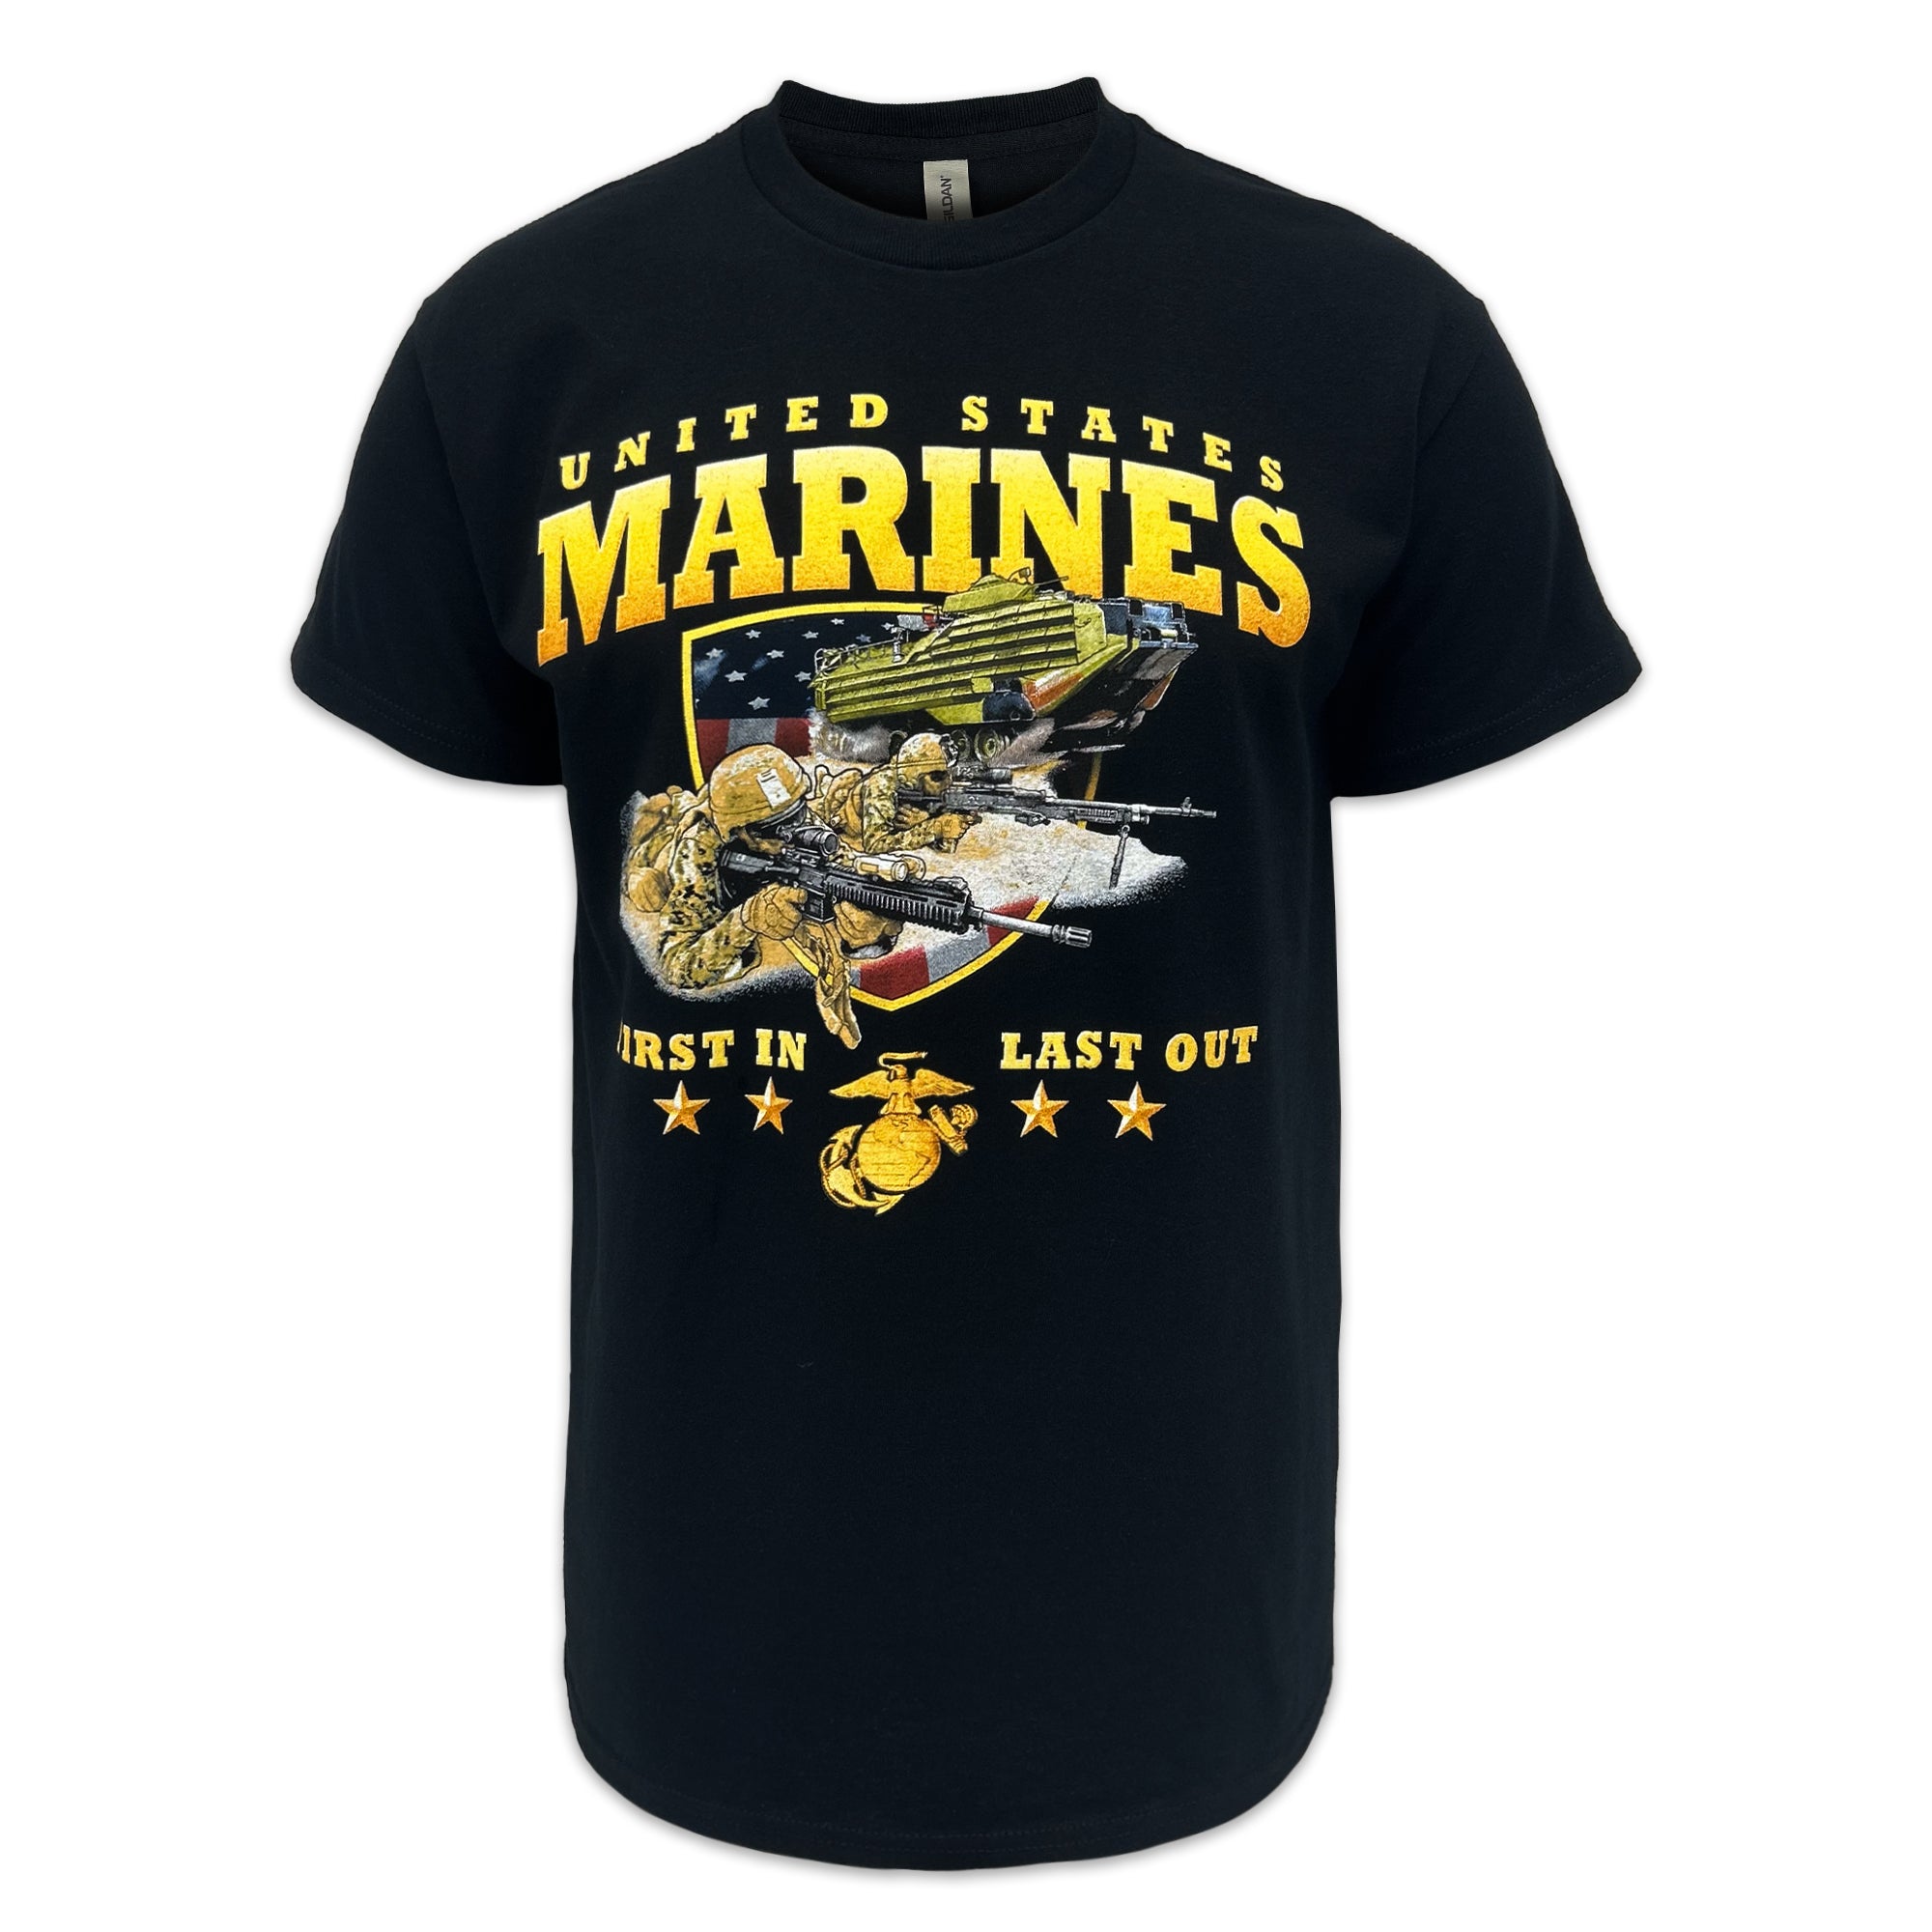 United States Marines Rush First In Last Out T-Shirt (Black)